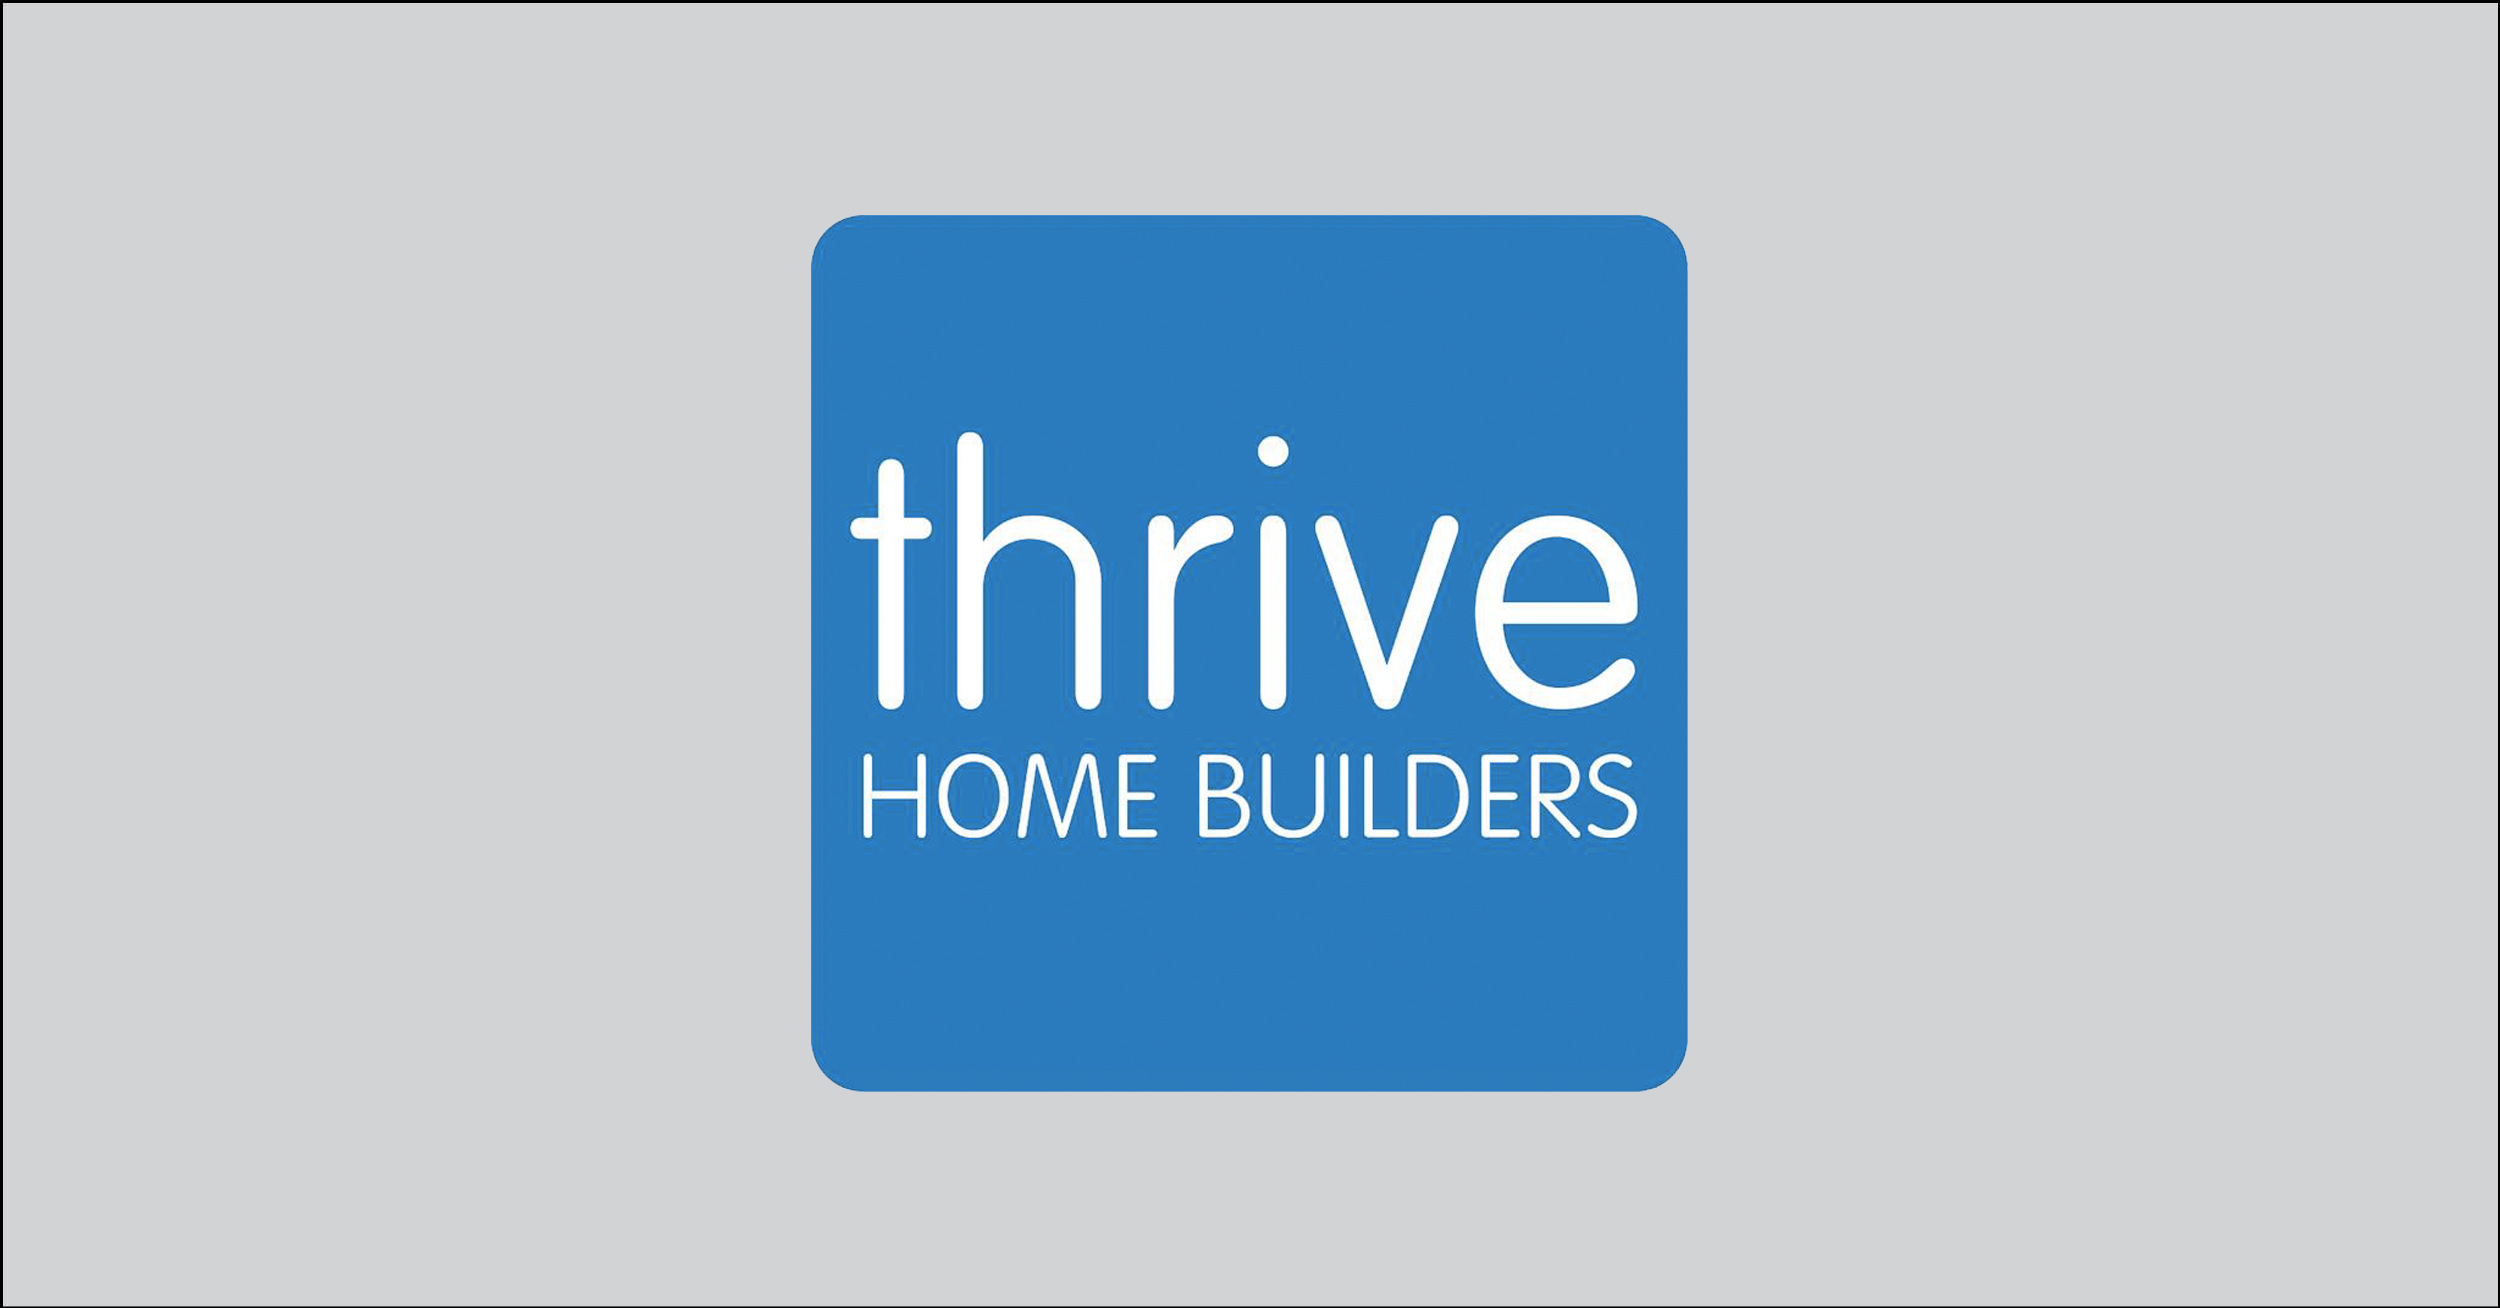 Find new construction or search for new homes and communities by Thrive Home Builders in Colorado